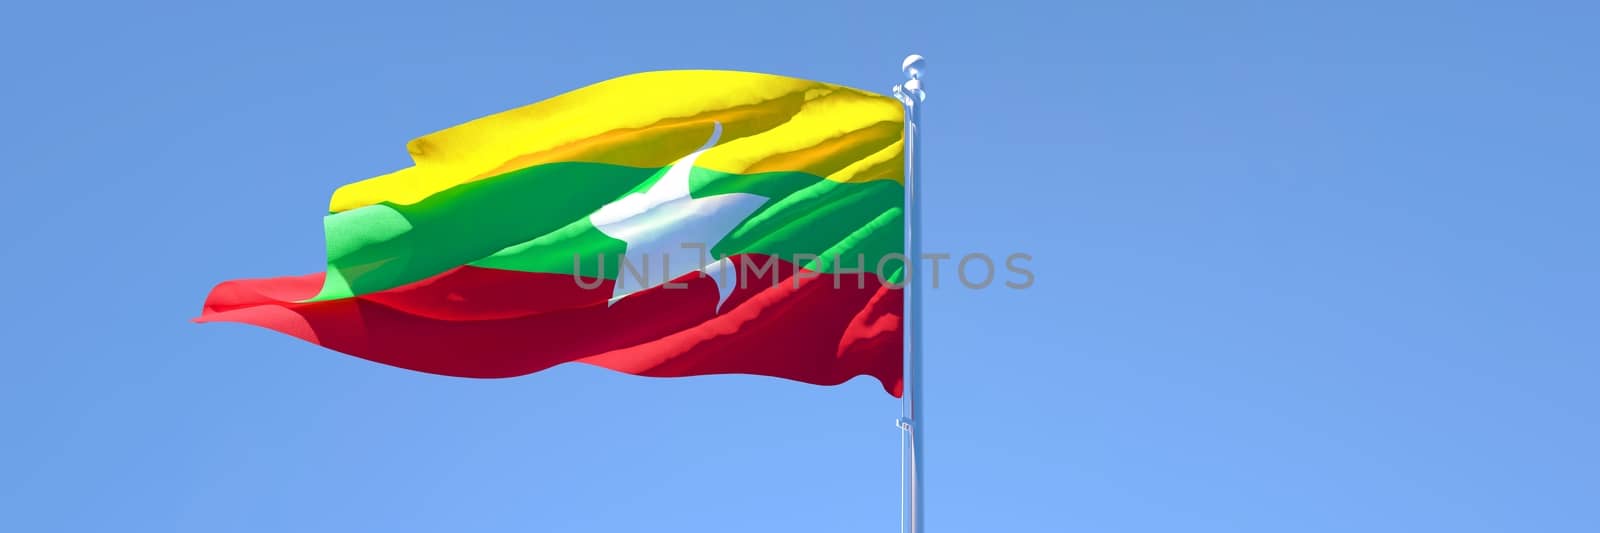 3D rendering of the national flag of Myanmar waving in the wind against a blue sky